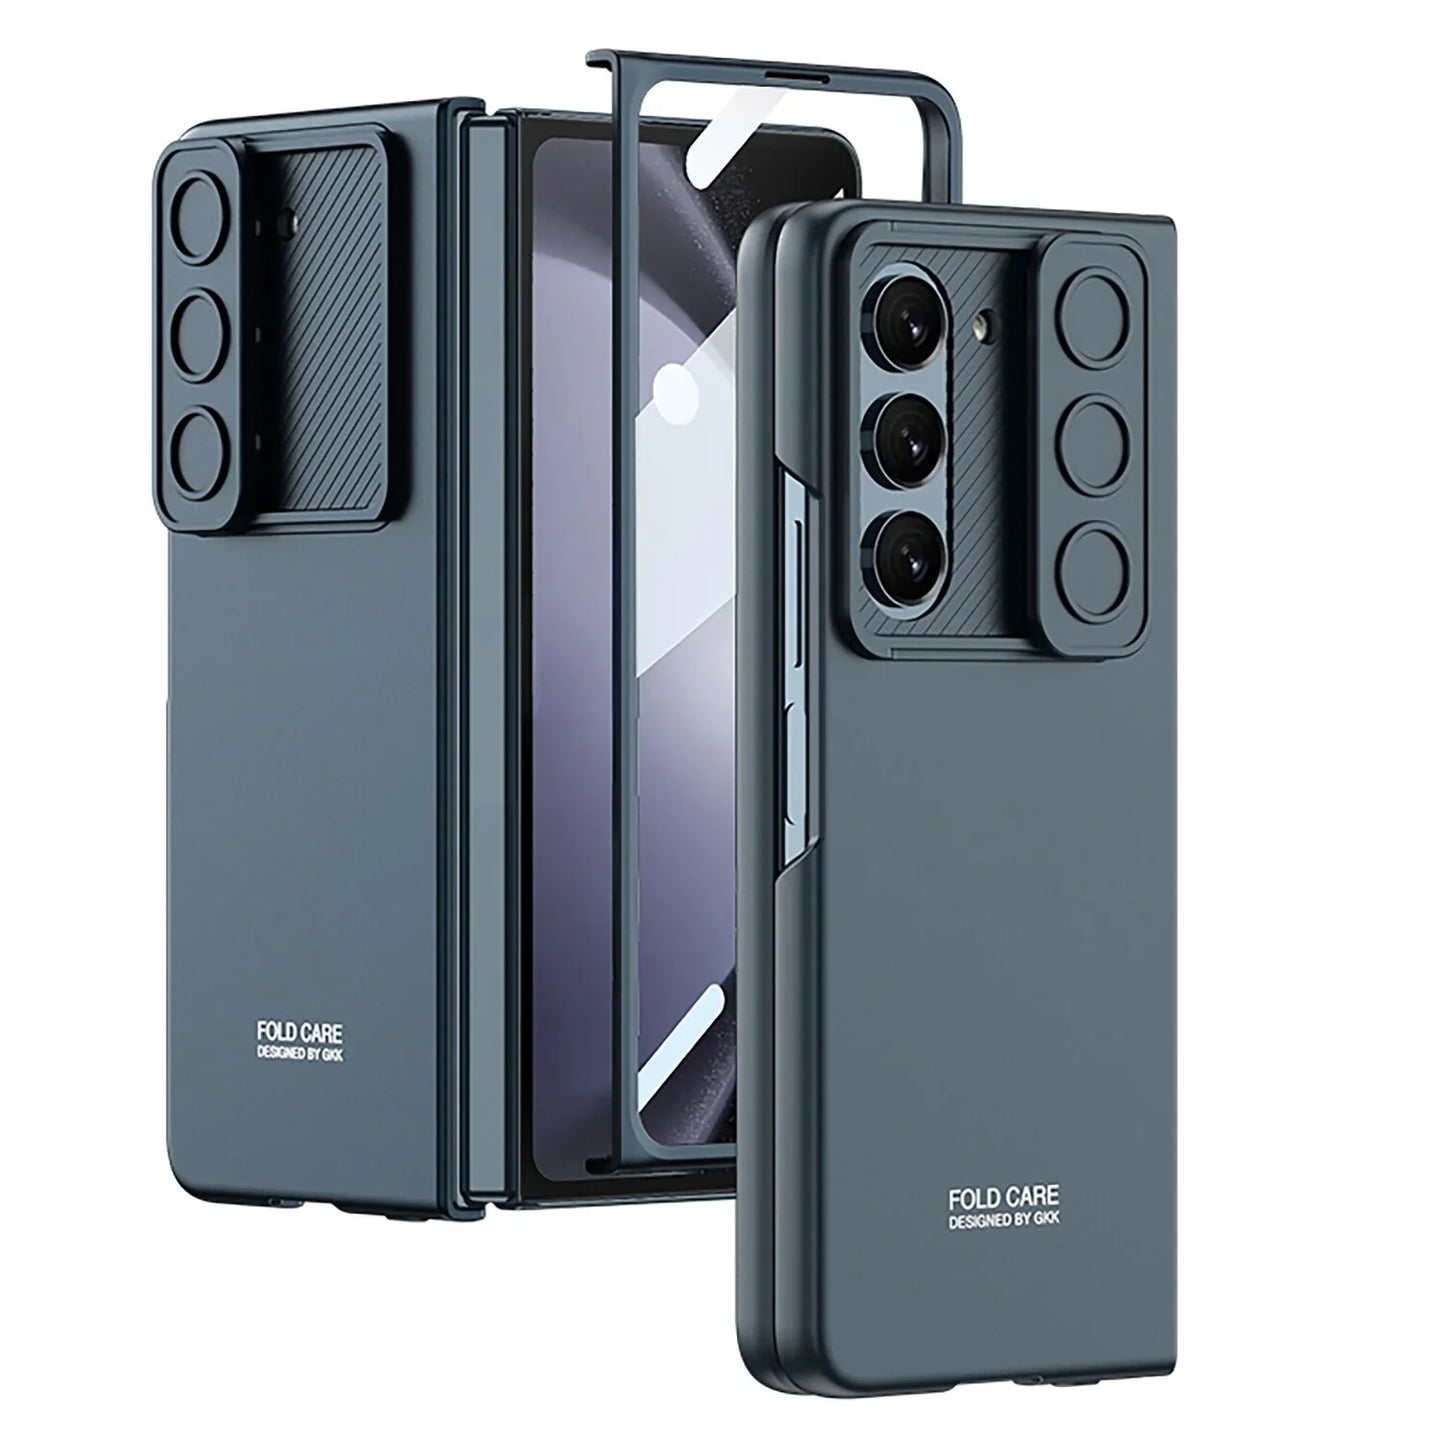 SLIM SHOCKPROOF CASE WITH SLIDE CAMERA PROTECTOR FOR SAMSUNG GALAXY Z FOLD 5